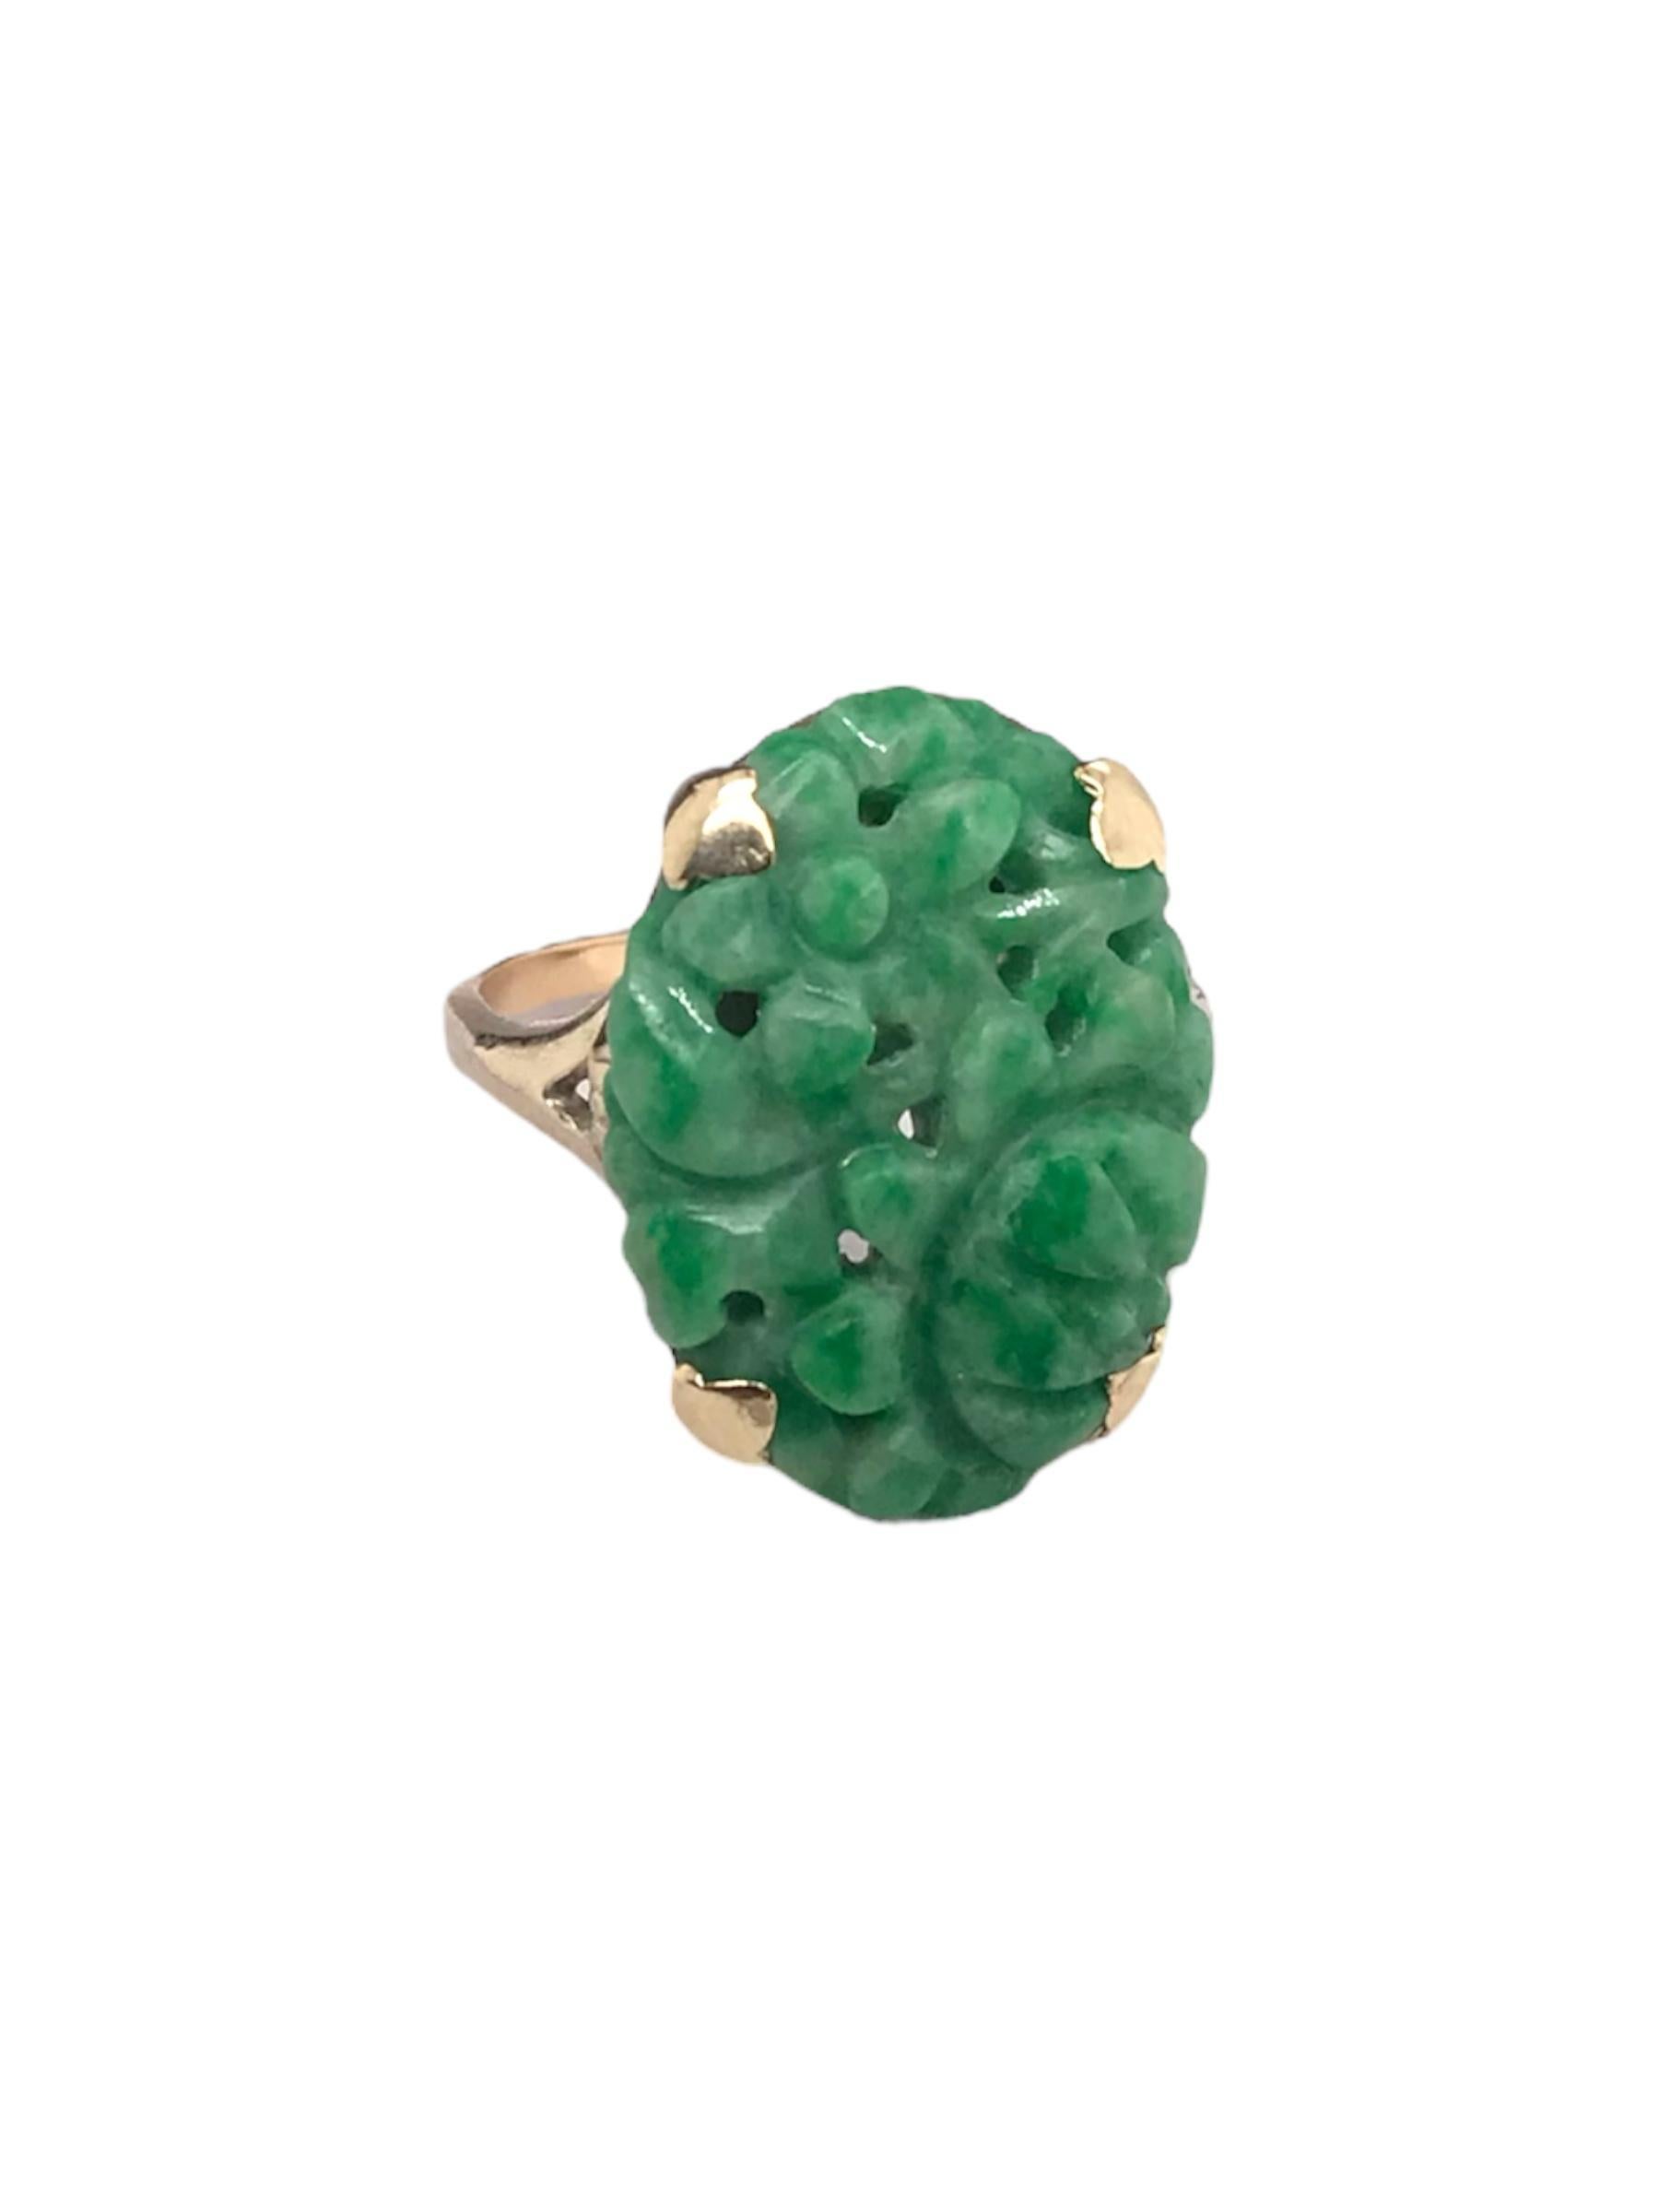 Retro Carved Jade Ring 10K Yellow Gold In Good Condition For Sale In Montgomery, AL